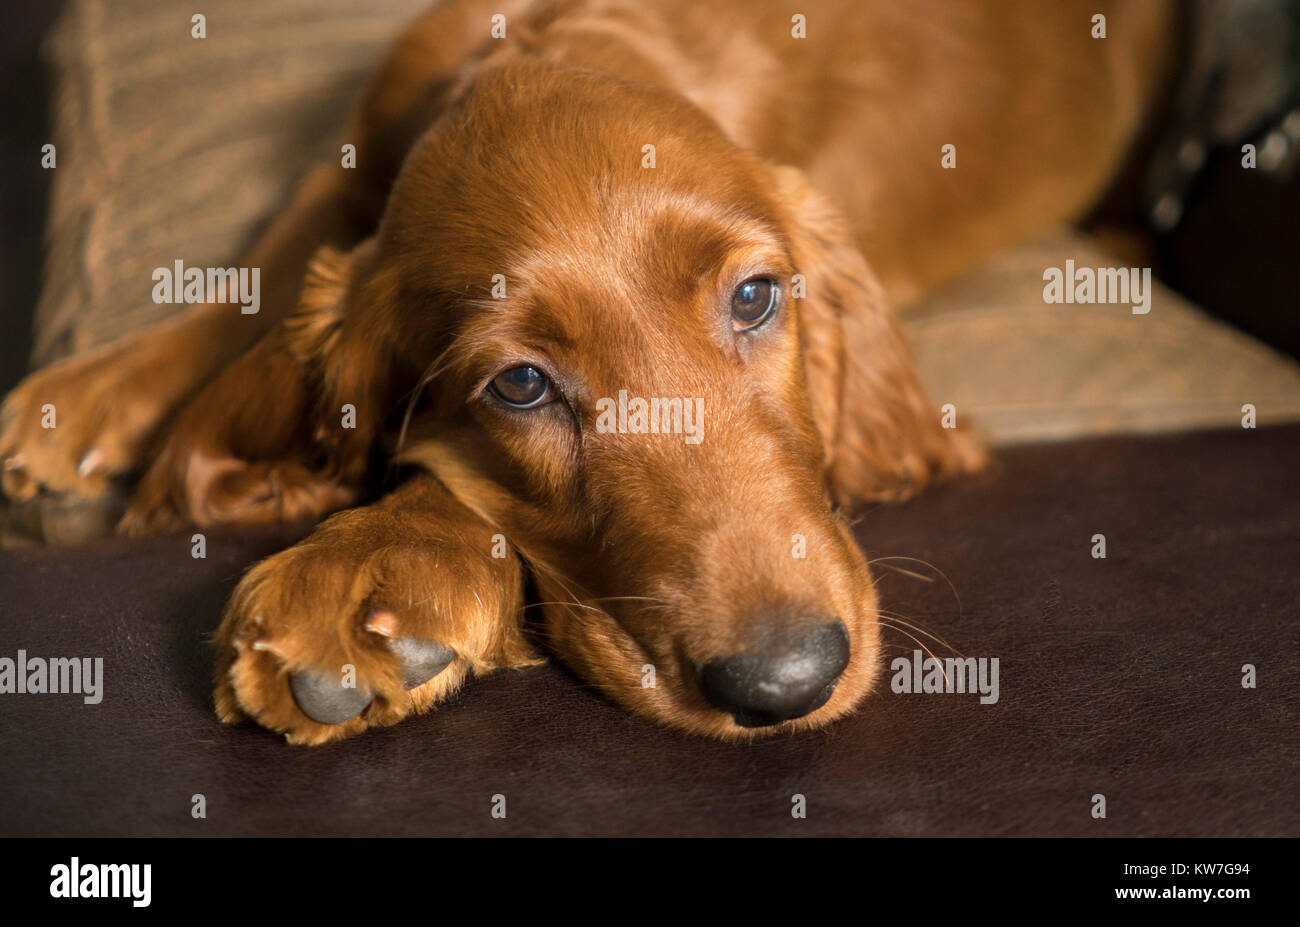 A young pure breed Irish Setter relaxes in a rare moment of quiet on the couch Stock Photo